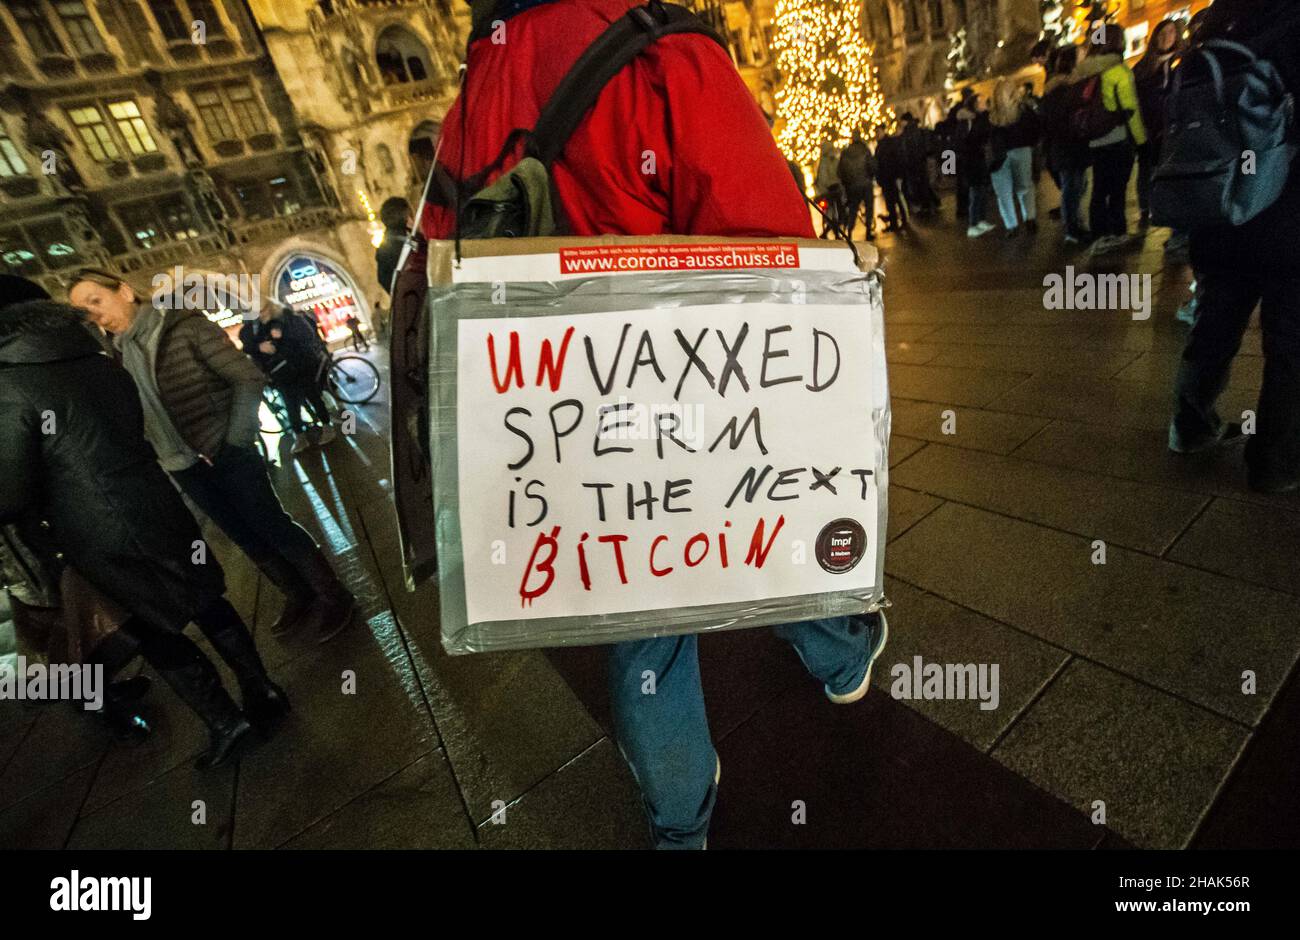 Munich, Bavaria, Germany. 13th Dec, 2021. An example of one of the signs at an anti-vaxx, anti-infection control demo in Munich, Germany where a demonstrator somehow equates the sperm of the unvaccinated as the next big cryptocurrency. As part of an increasing frequency of unregistered demos, 140 Corona deniers of Munich, Germany assembled again at Marienplatz and walked alongside flag-holding SHAEF Reichsbuerger (sovereign citizens) towards Stachus and back. Police assembled lines to keep the participants in a certain area, at which point some argued and eventually left the area. The gr Stock Photo